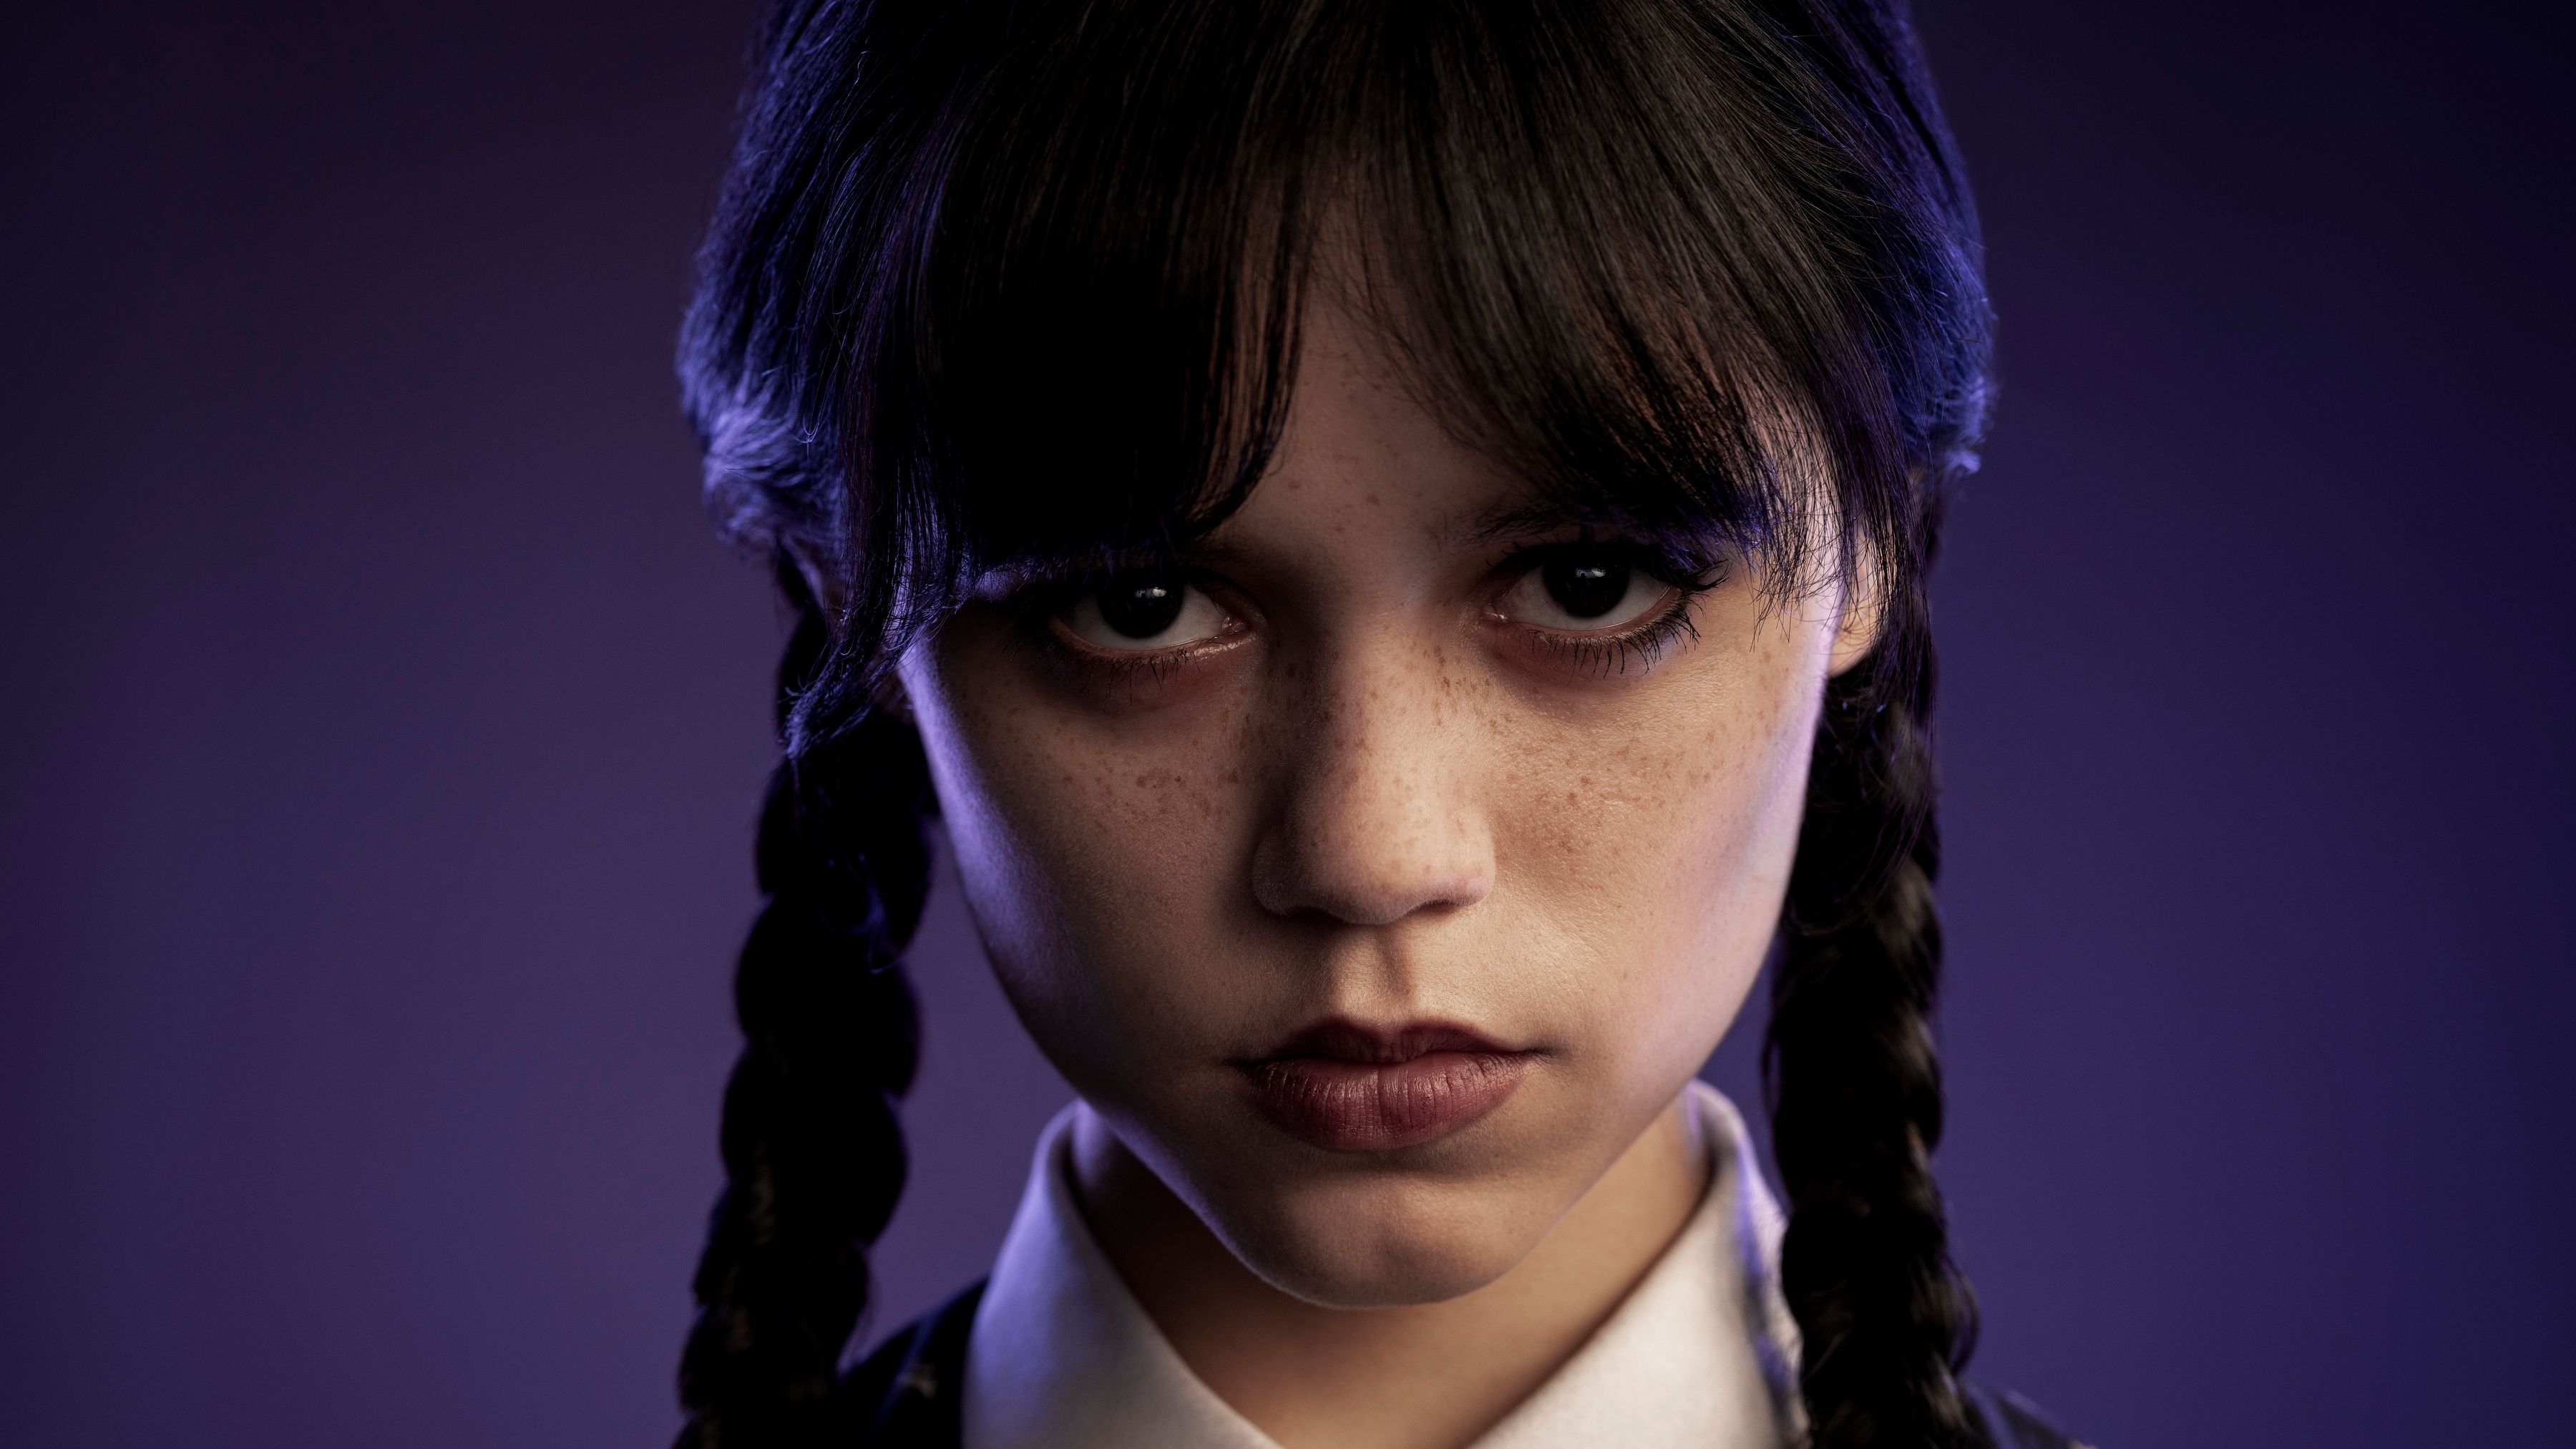 Christina Ricci joins Addams Family show Wednesday as new character